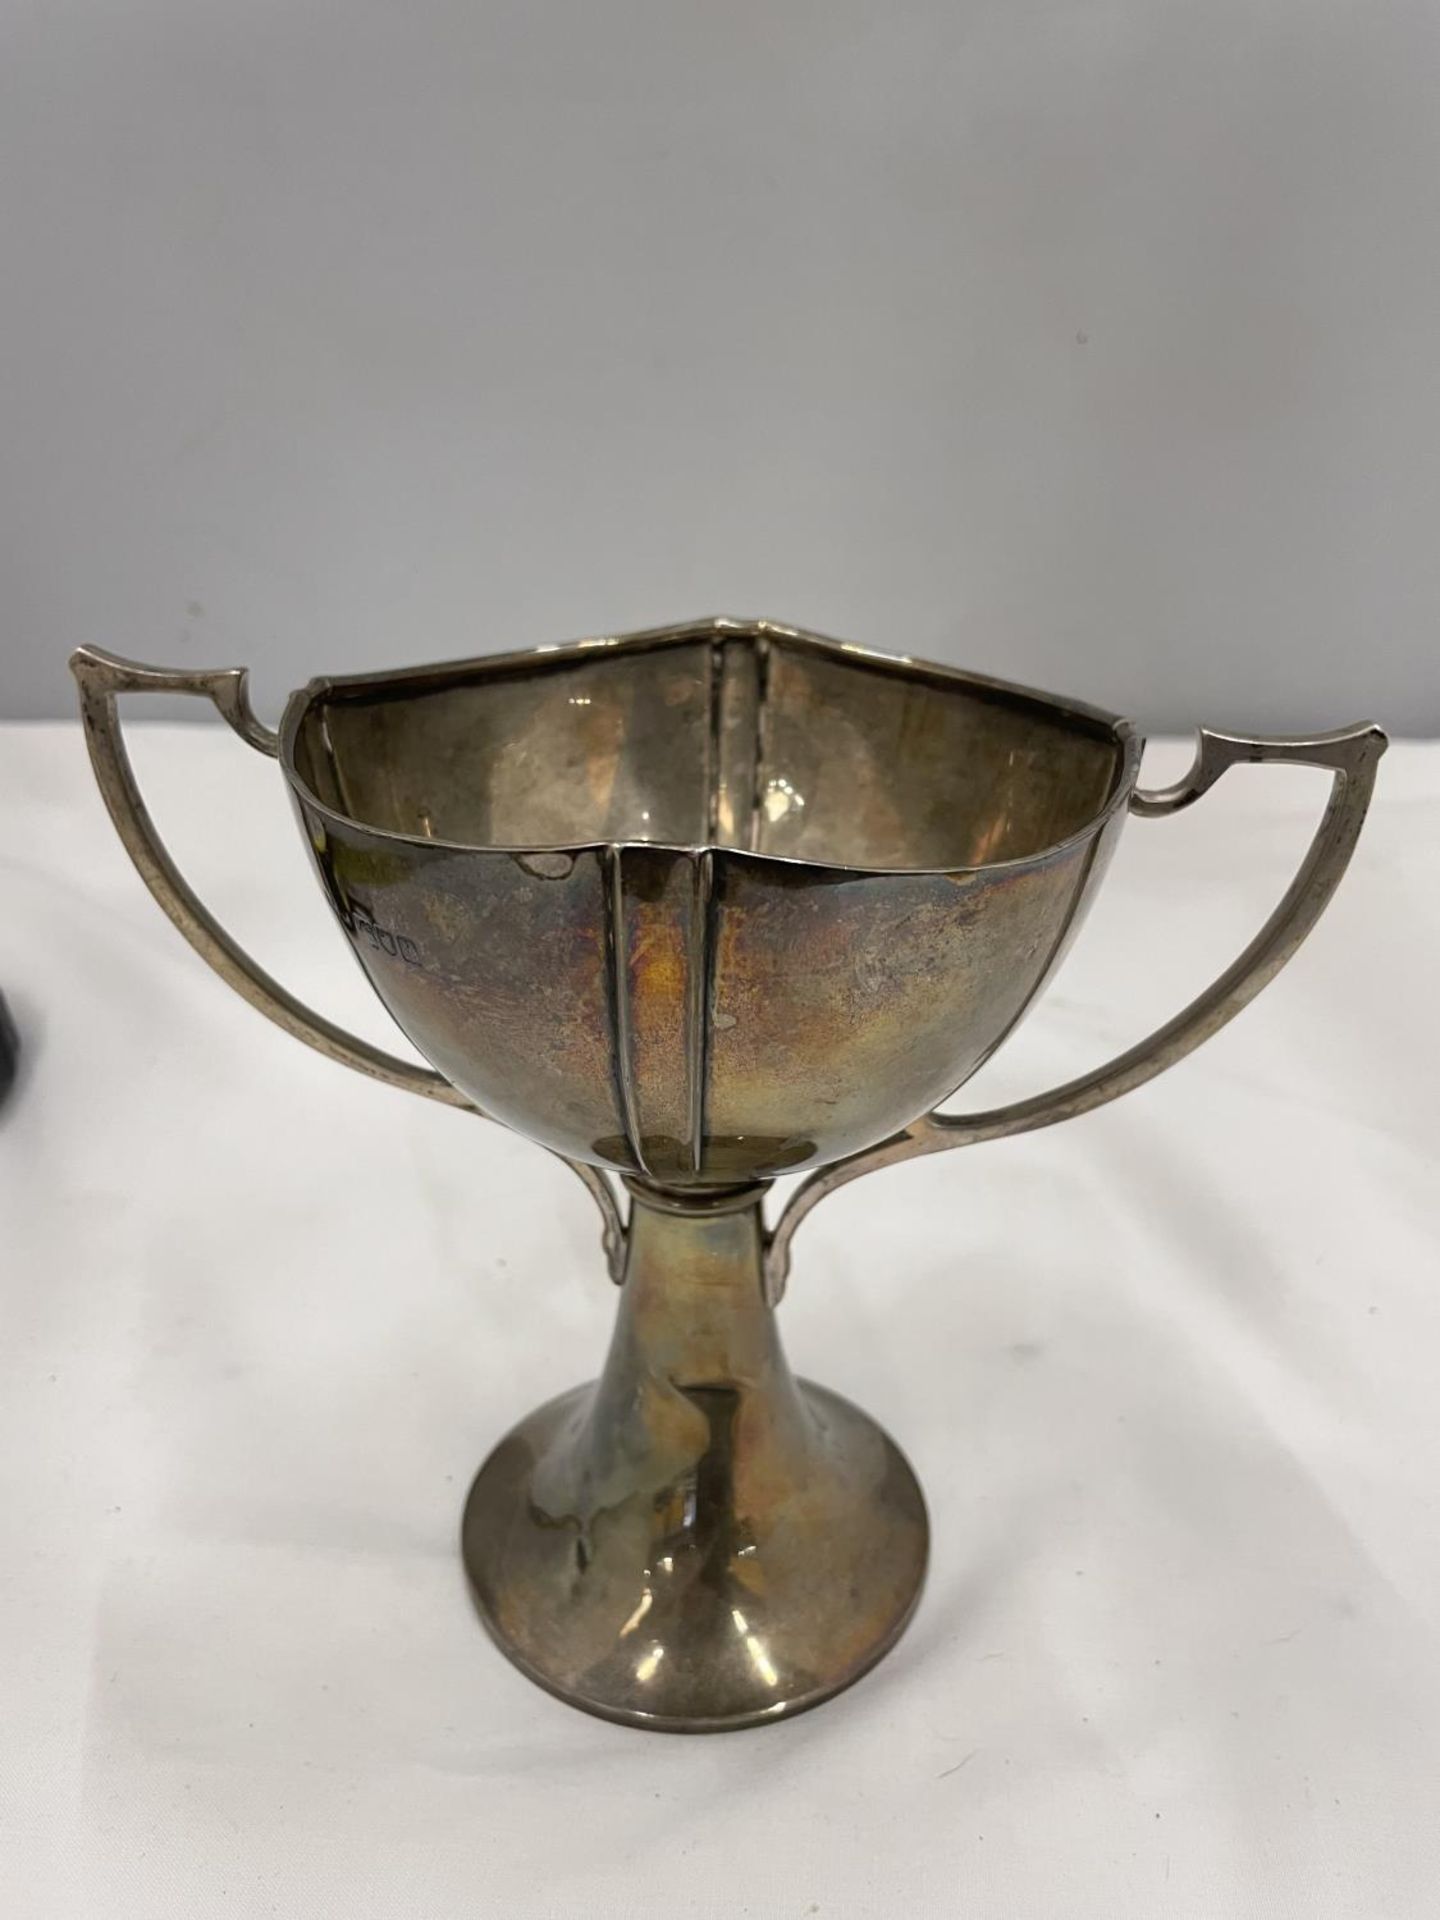 A HALLMARKED LONDON SILVER TWIN HANDLED CUP GROSS WEIGHT 227 GRAMS ENGRAVED S V L H CAMP 1913 - Image 2 of 5